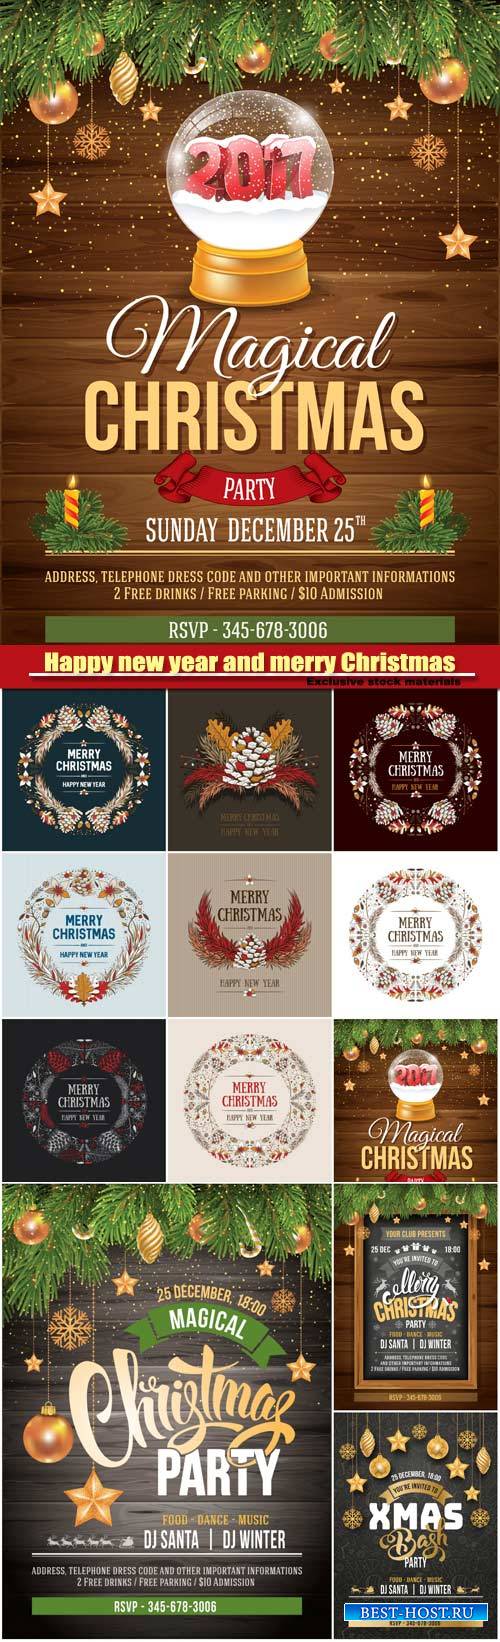 Christmas design, luxury template design for Christmas party